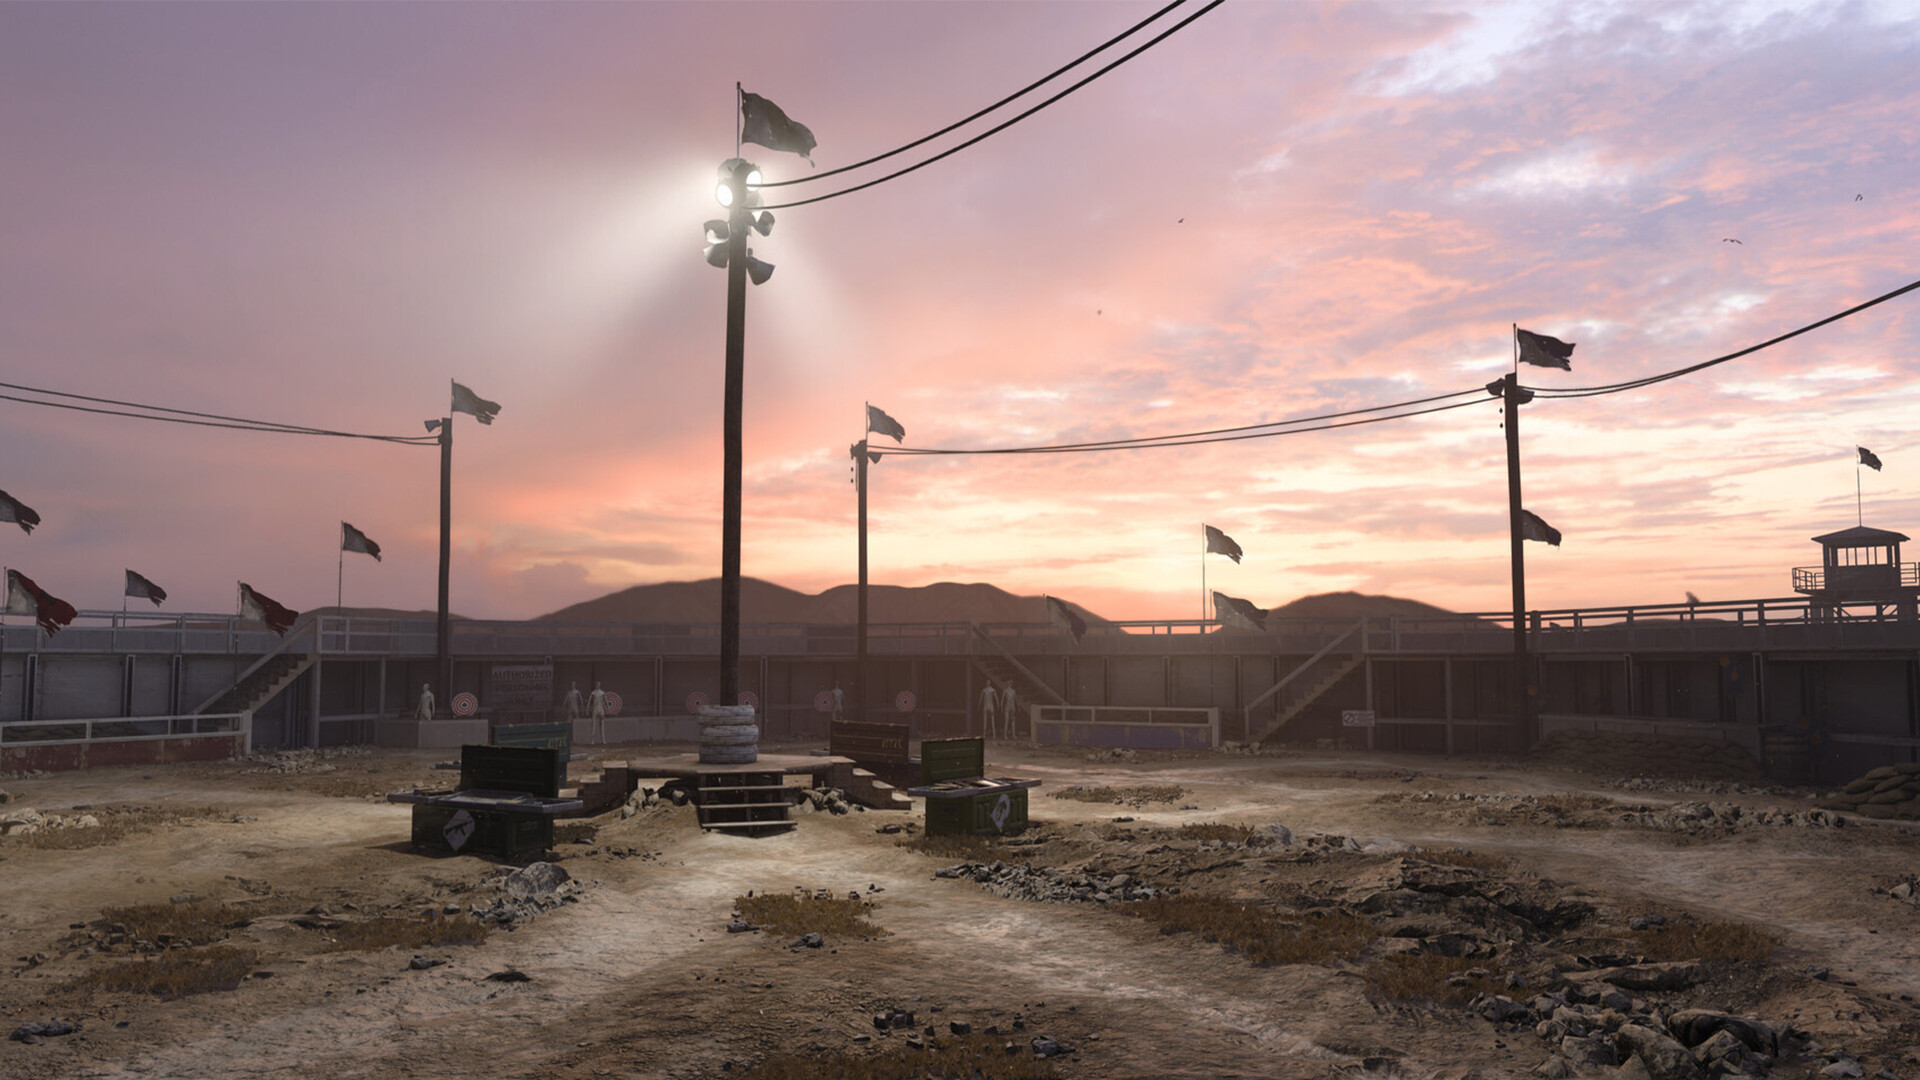 Here are all of the Champion Hill maps in Call of Duty: Vanguard